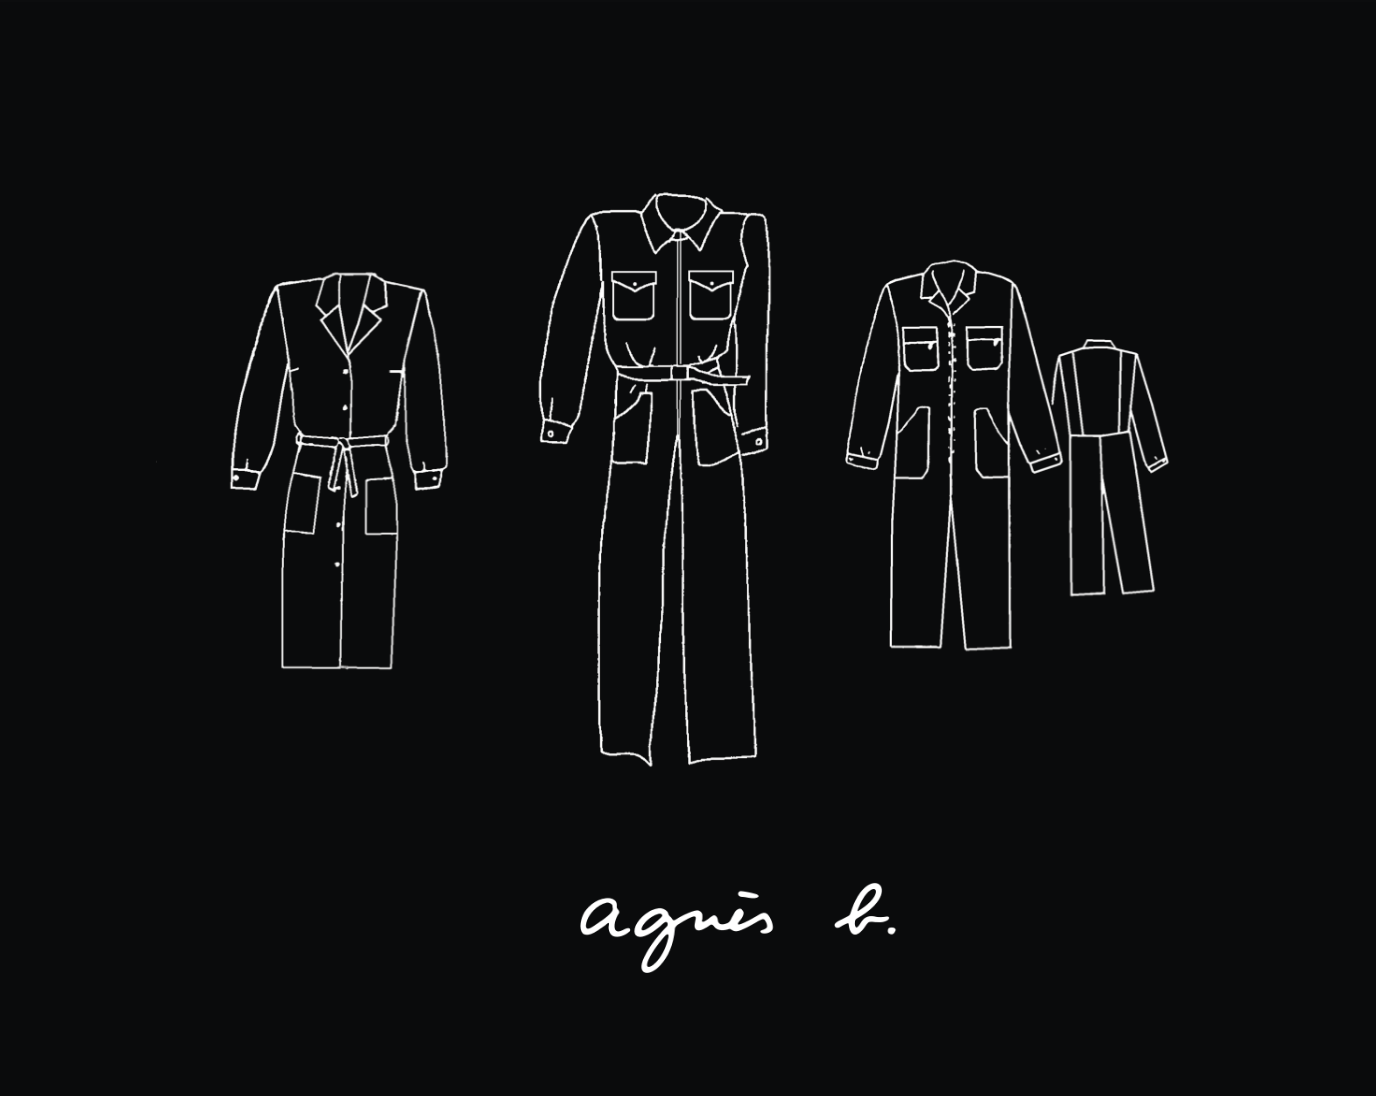 Agnès b logo with drawings of clothes